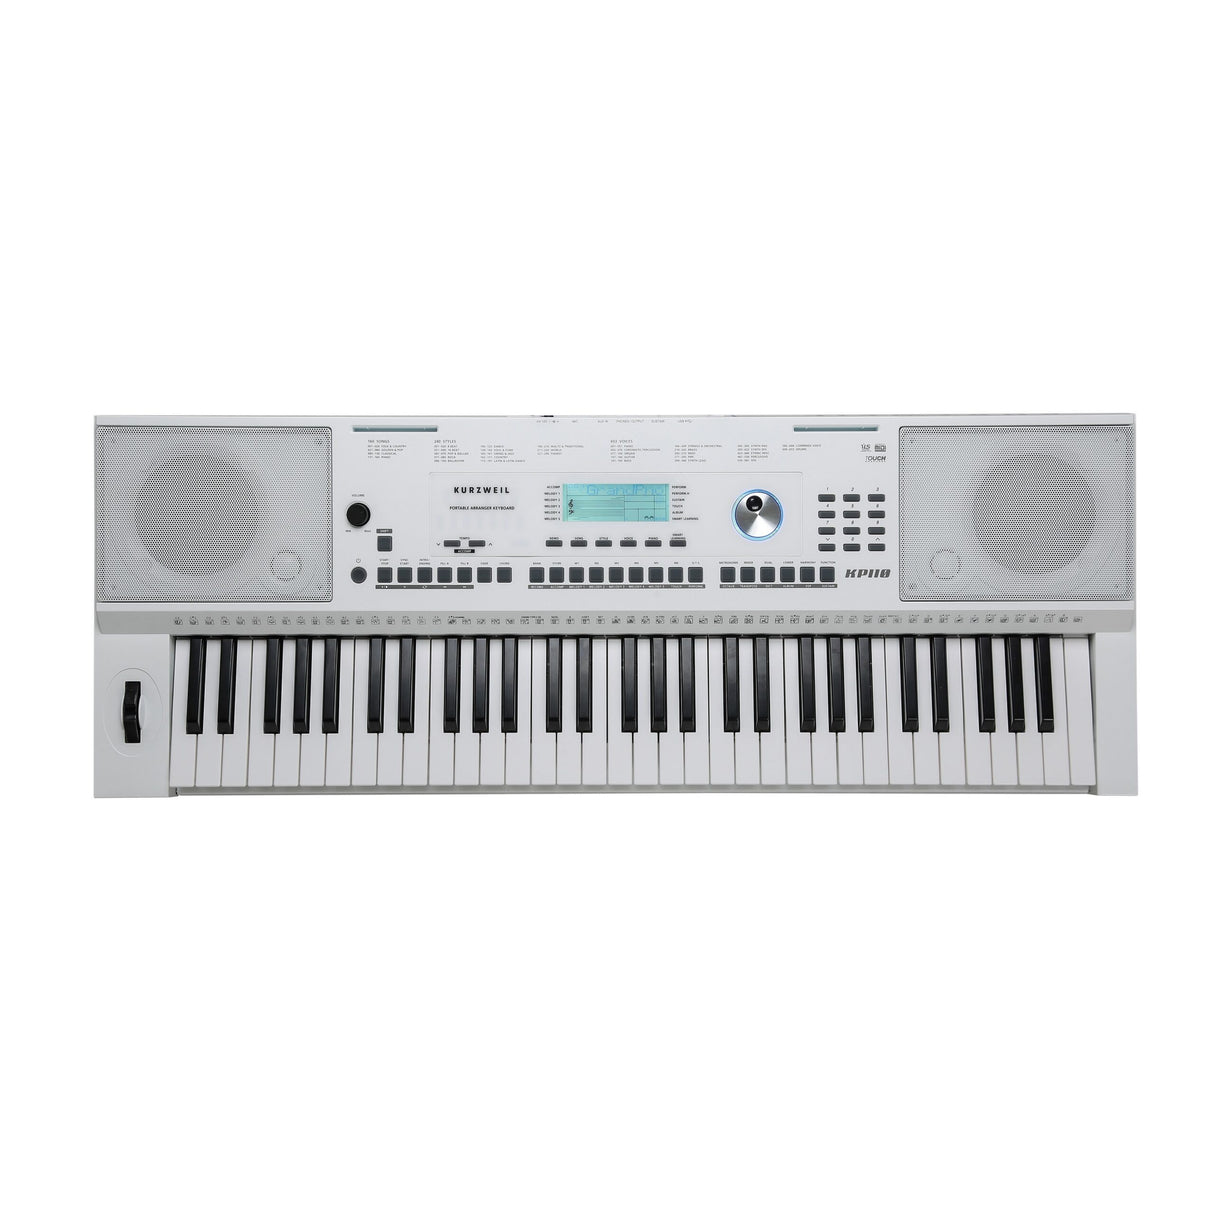 Kurzweil KP-110-WH 61-Key Portable Arranger with 6-Track Song Recorder, White